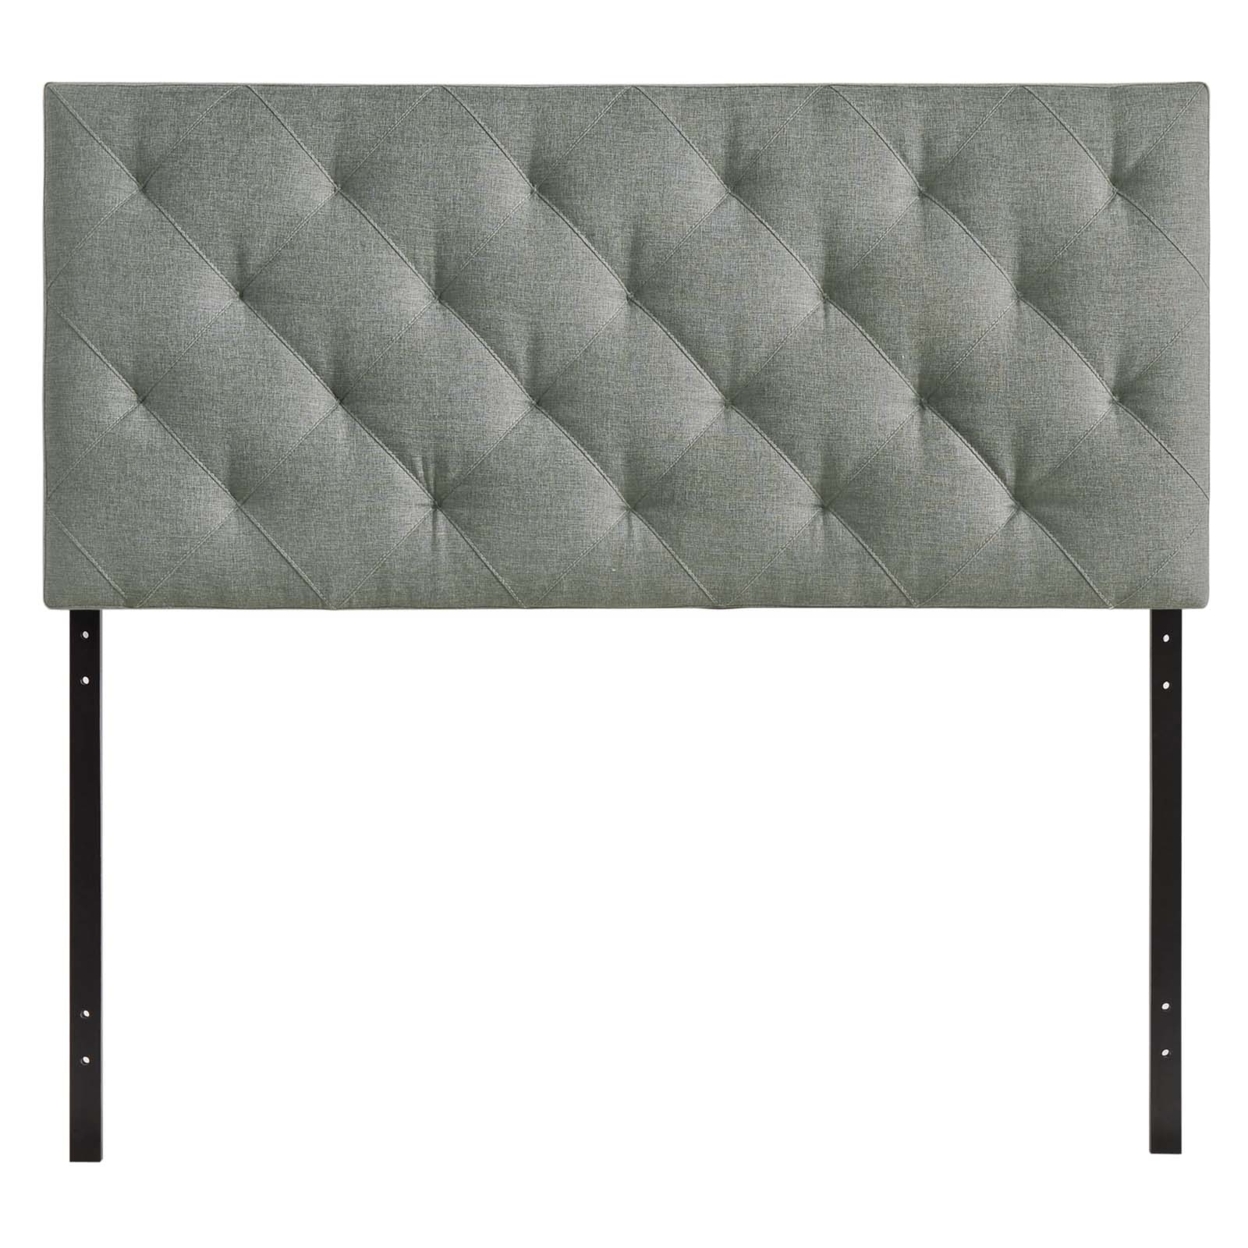 Theodore Queen Upholstered Fabric Headboard, Gray